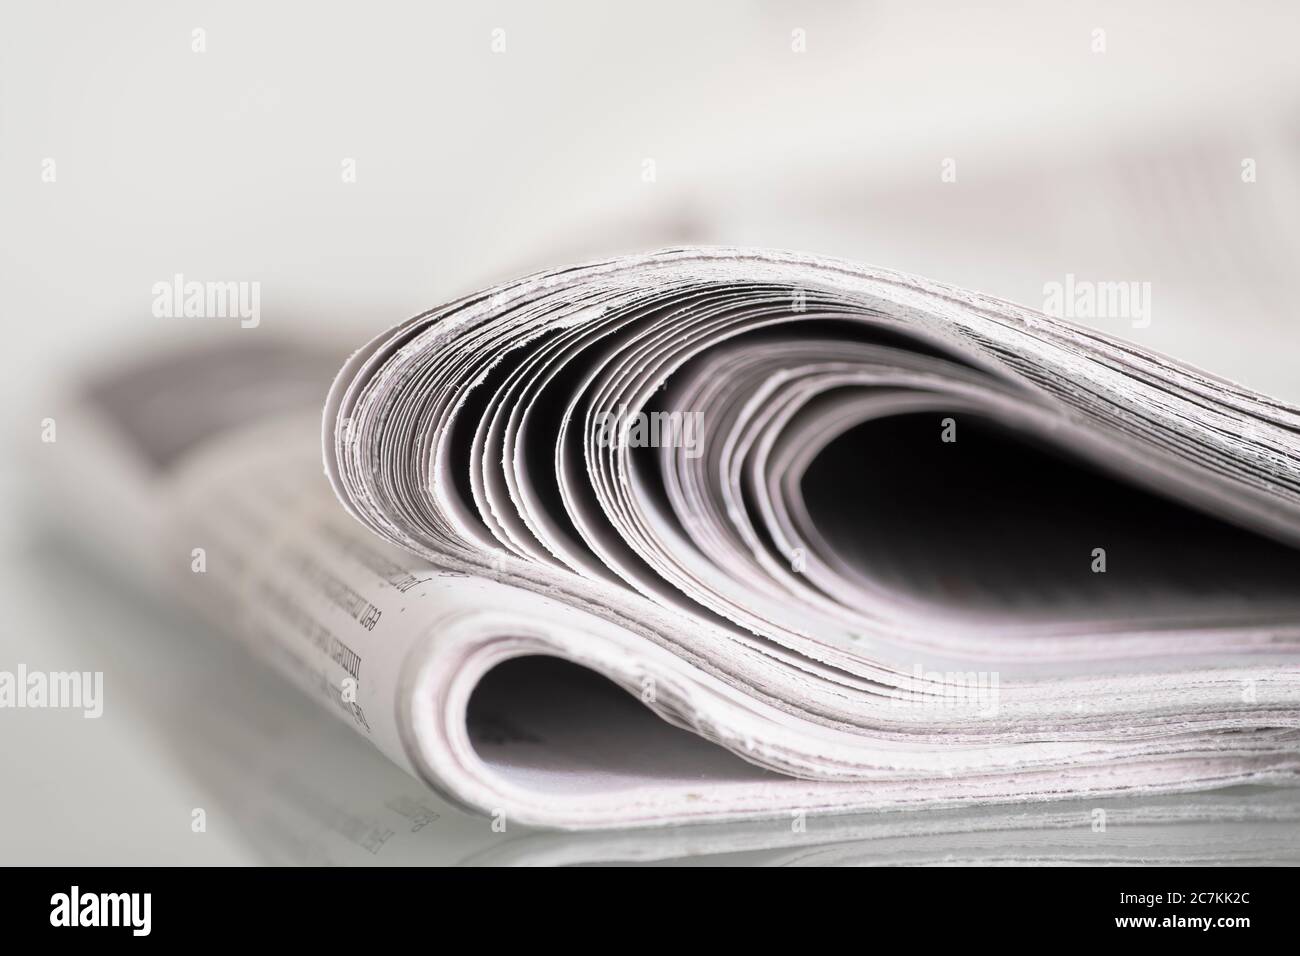 Folded newspaper on a table against plain background with narrow depth of field Stock Photo